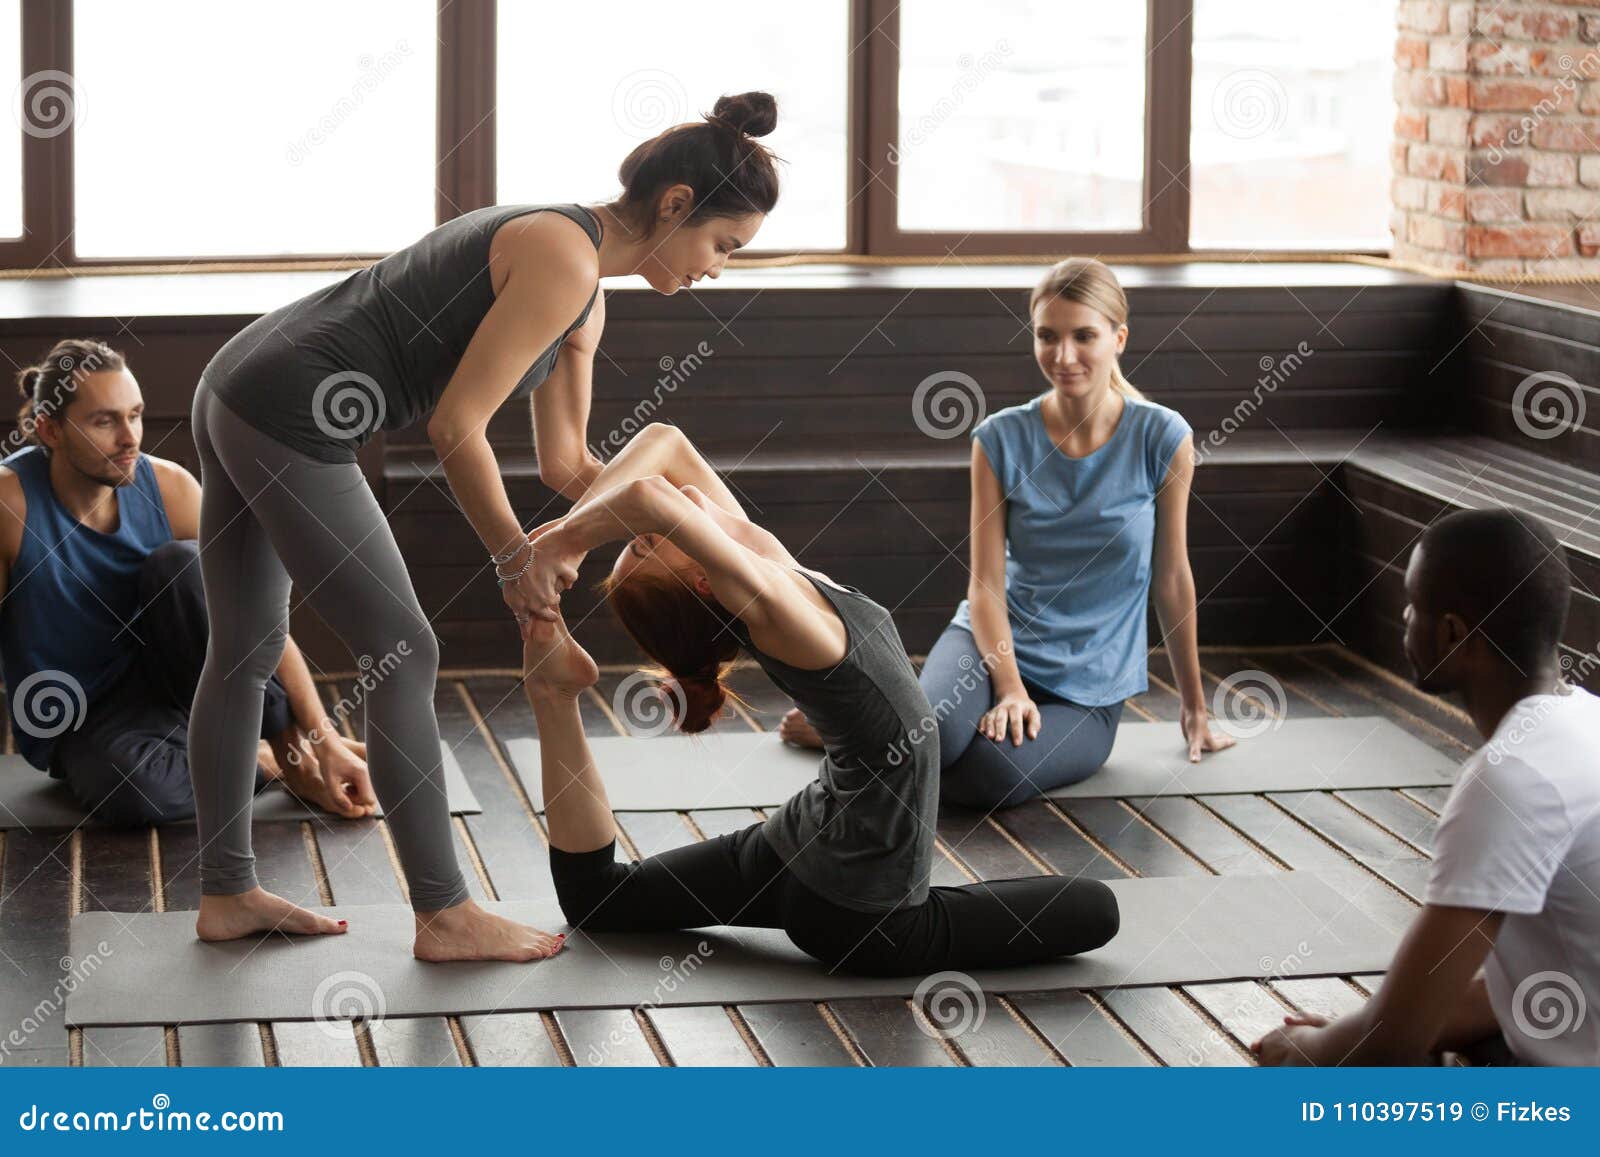 female yoga instructor helping woman doing exercise at group tra